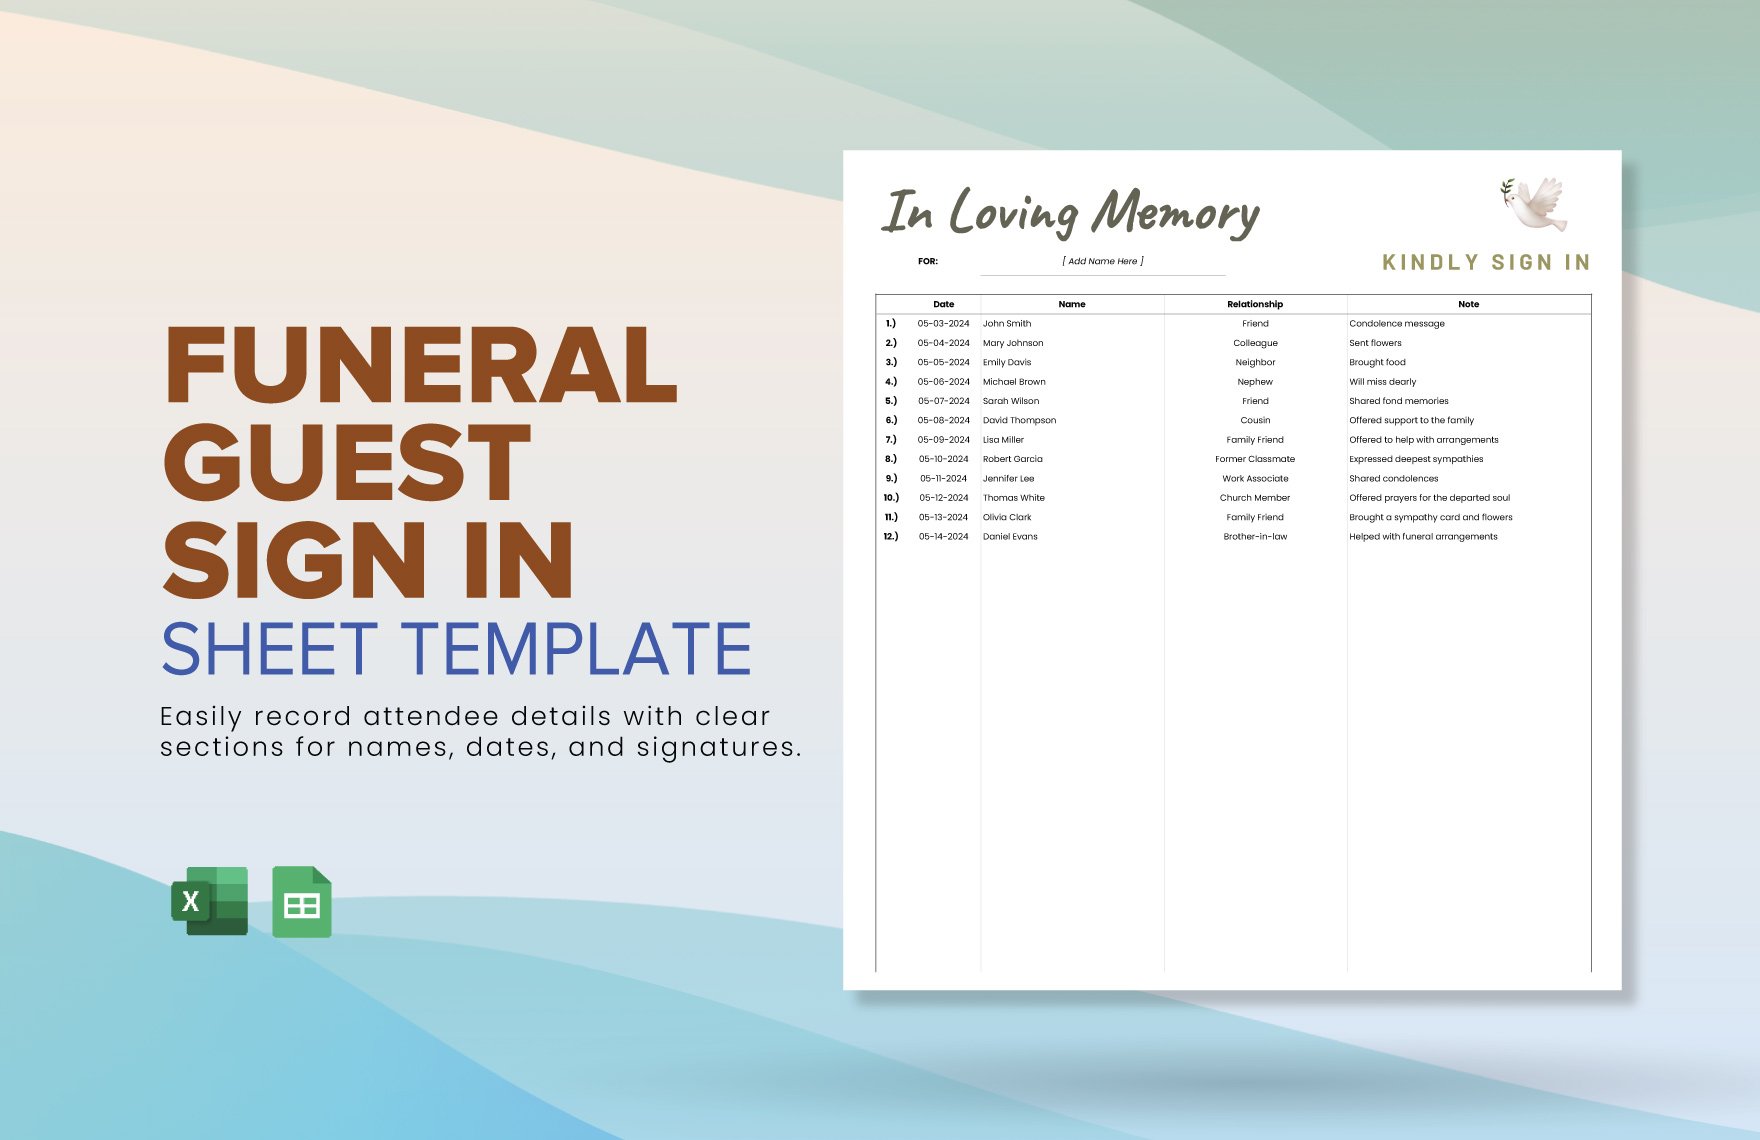 Funeral Guest Sign in Sheet Template in Excel, Google Sheets